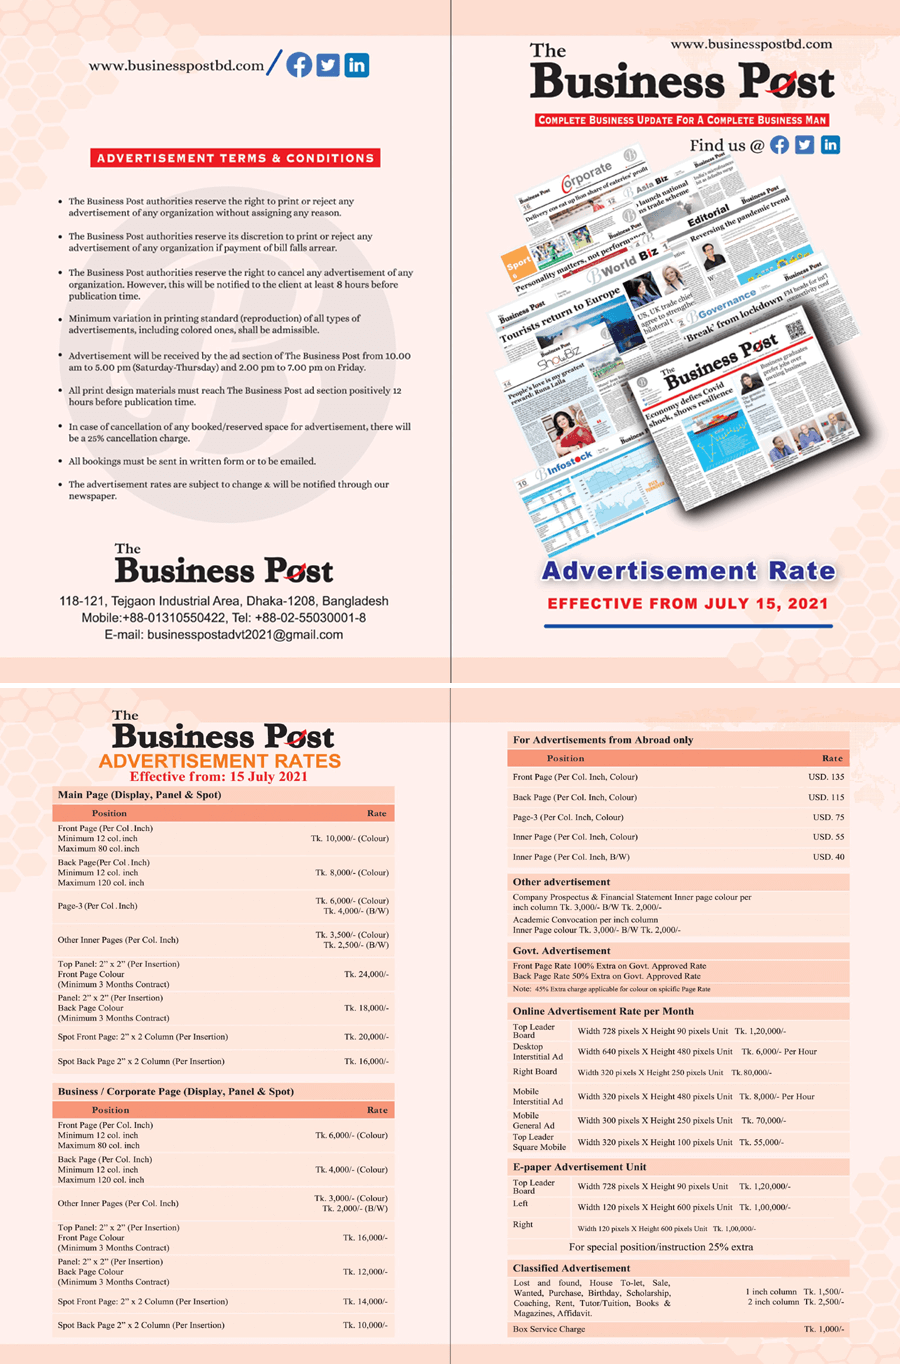 The Business Post Advertisement Rate